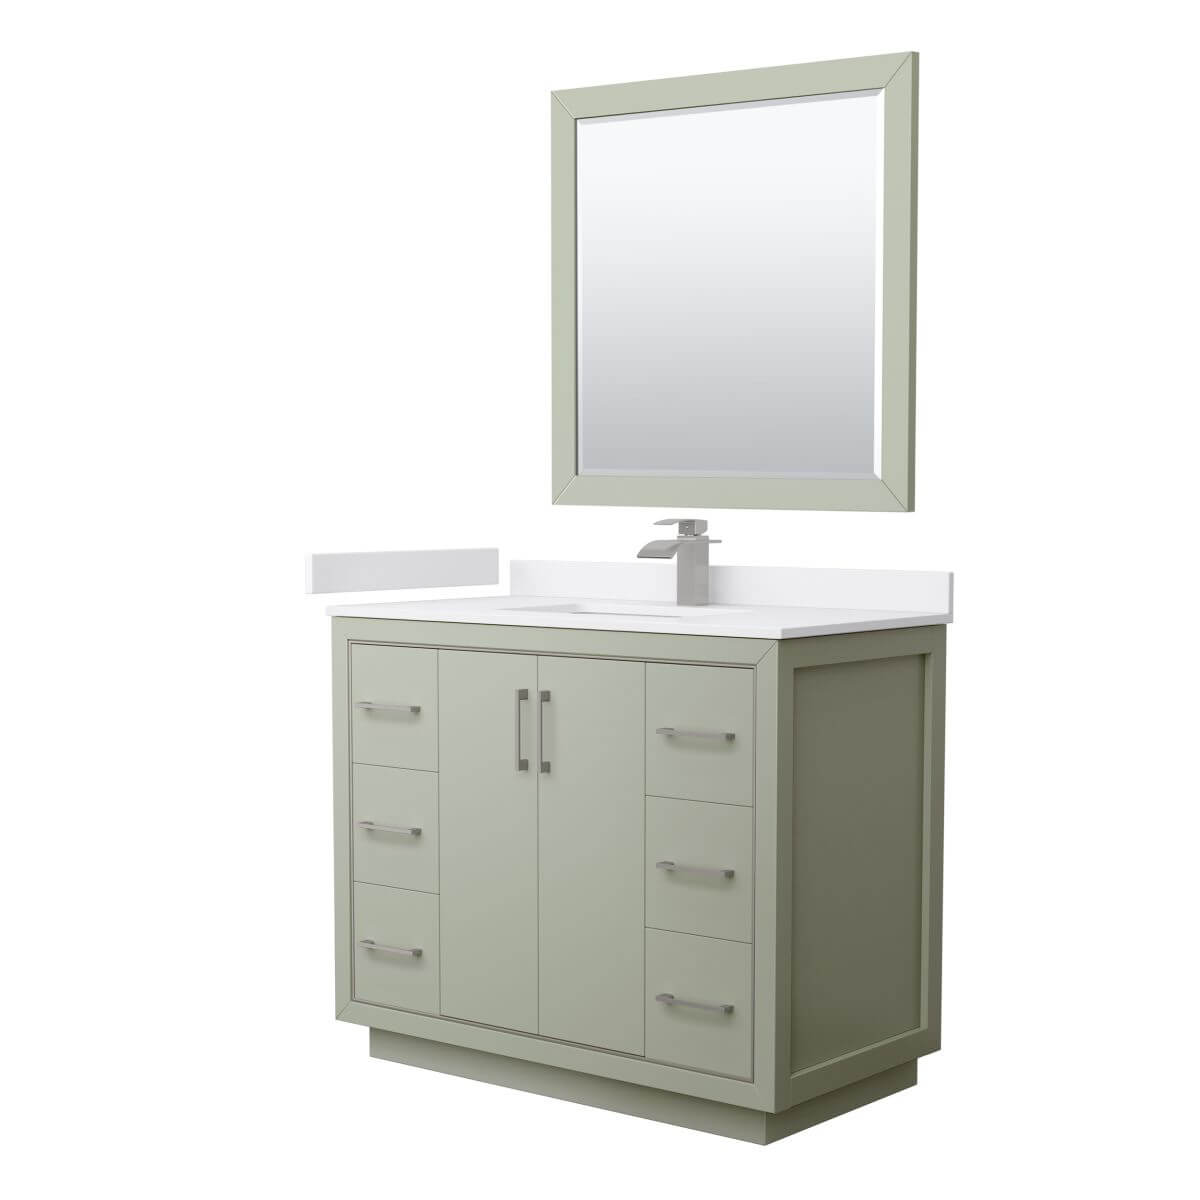 Wyndham Collection WCF111142SLGWCUNSM34 Icon 42 inch Single Bathroom Vanity in Light Green with White Cultured Marble Countertop, Undermount Square Sink, Brushed Nickel Trim and 34 Inch Mirror